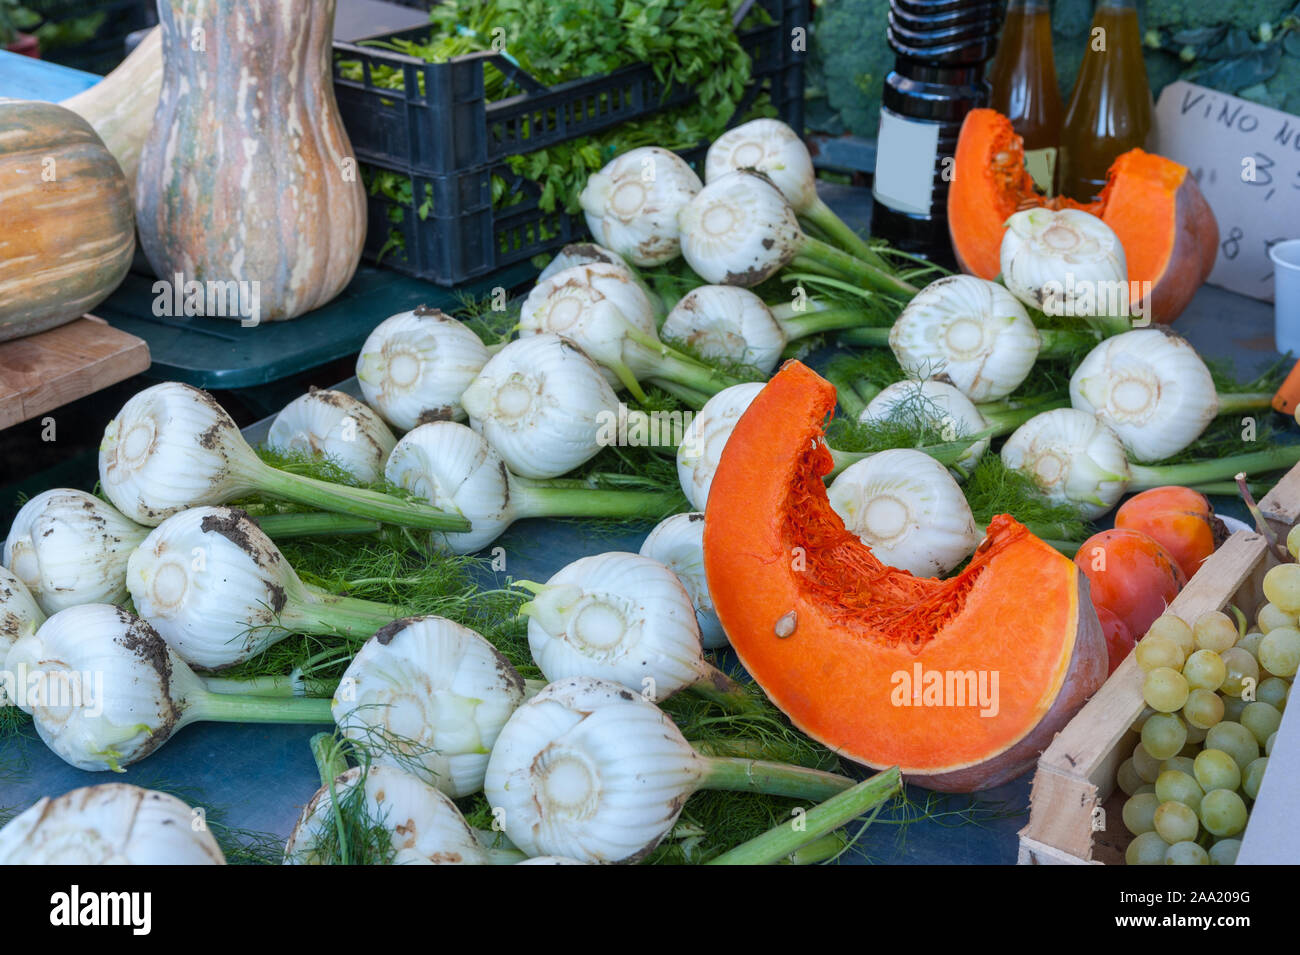 Farmers Market fruits and vegetables exposition Stock Photo